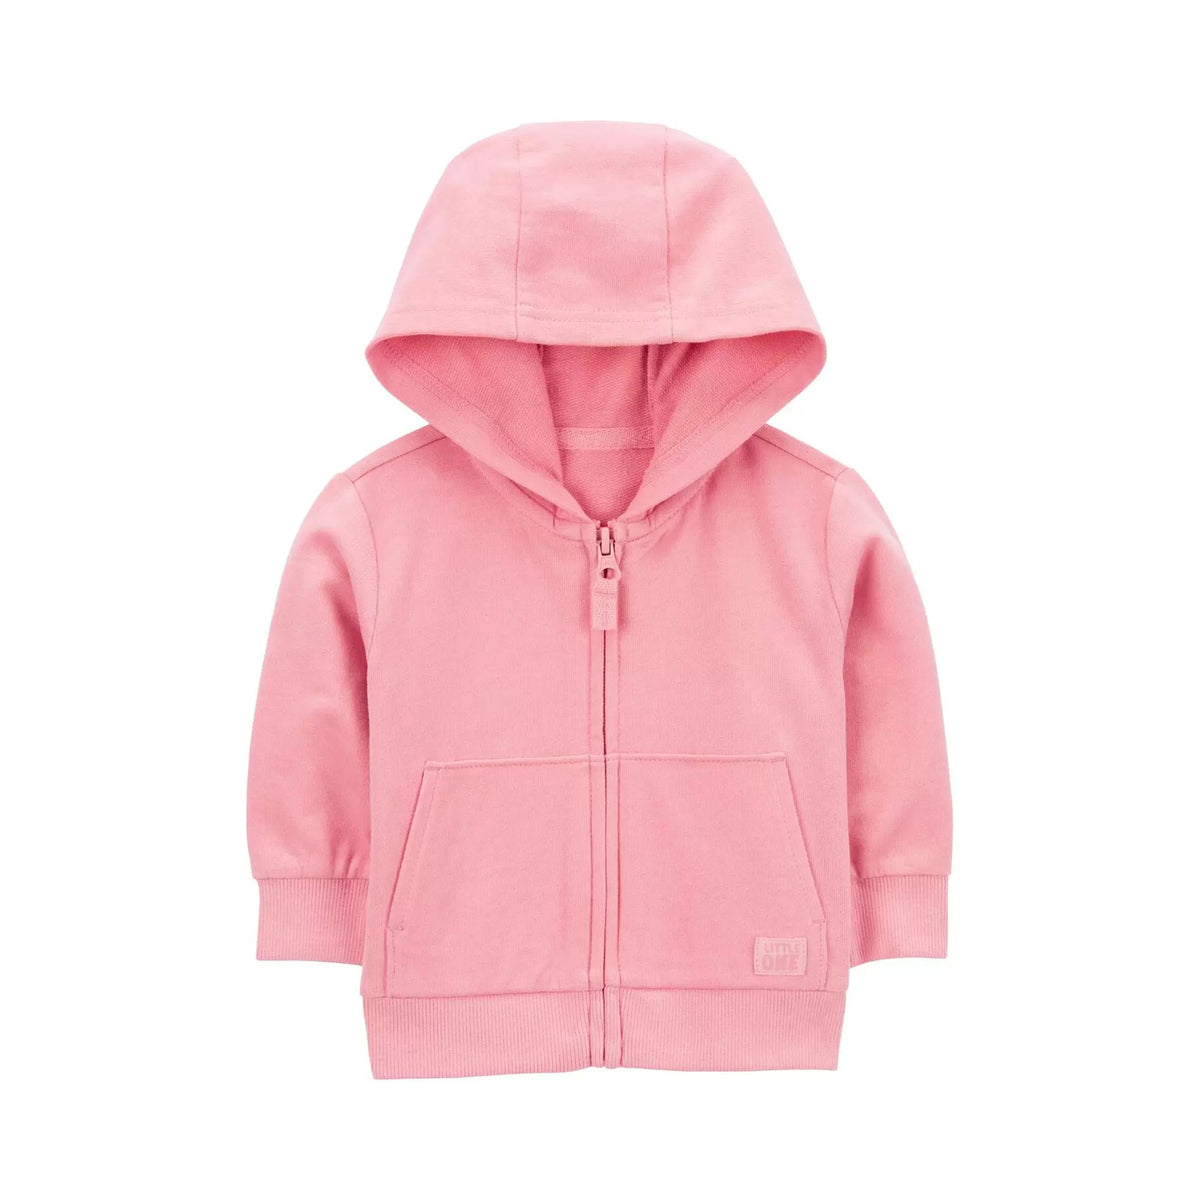 Carter's pink home casual jacket (6M-24M)